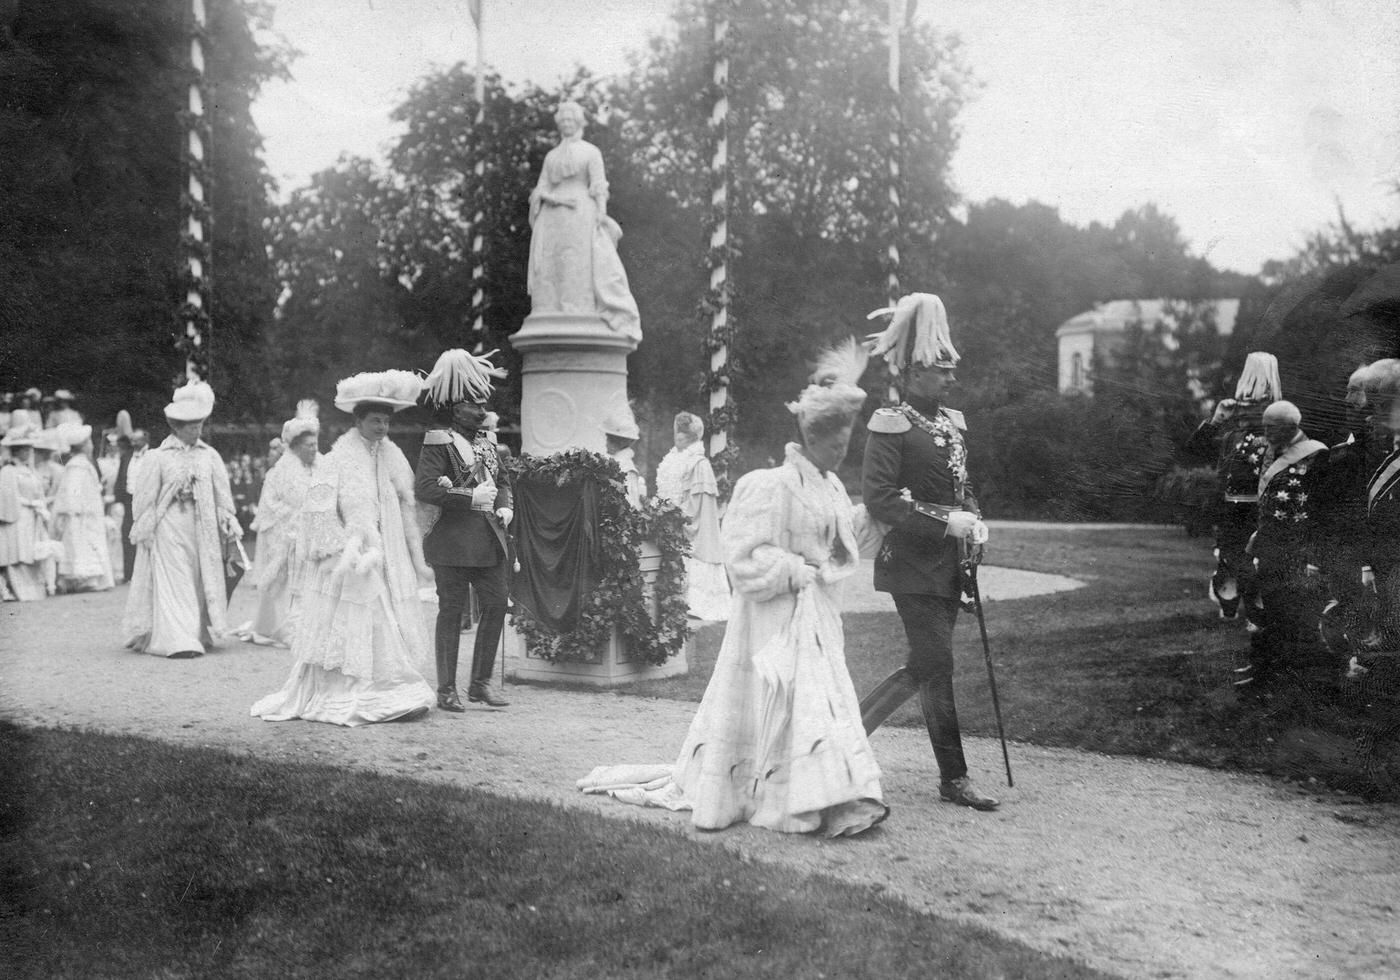 Inauguration of a monument of Grand Duchess Alexandrine in Schwerin with Dutch Royalty, Germany, Vintage property of ullstein bild, 1904